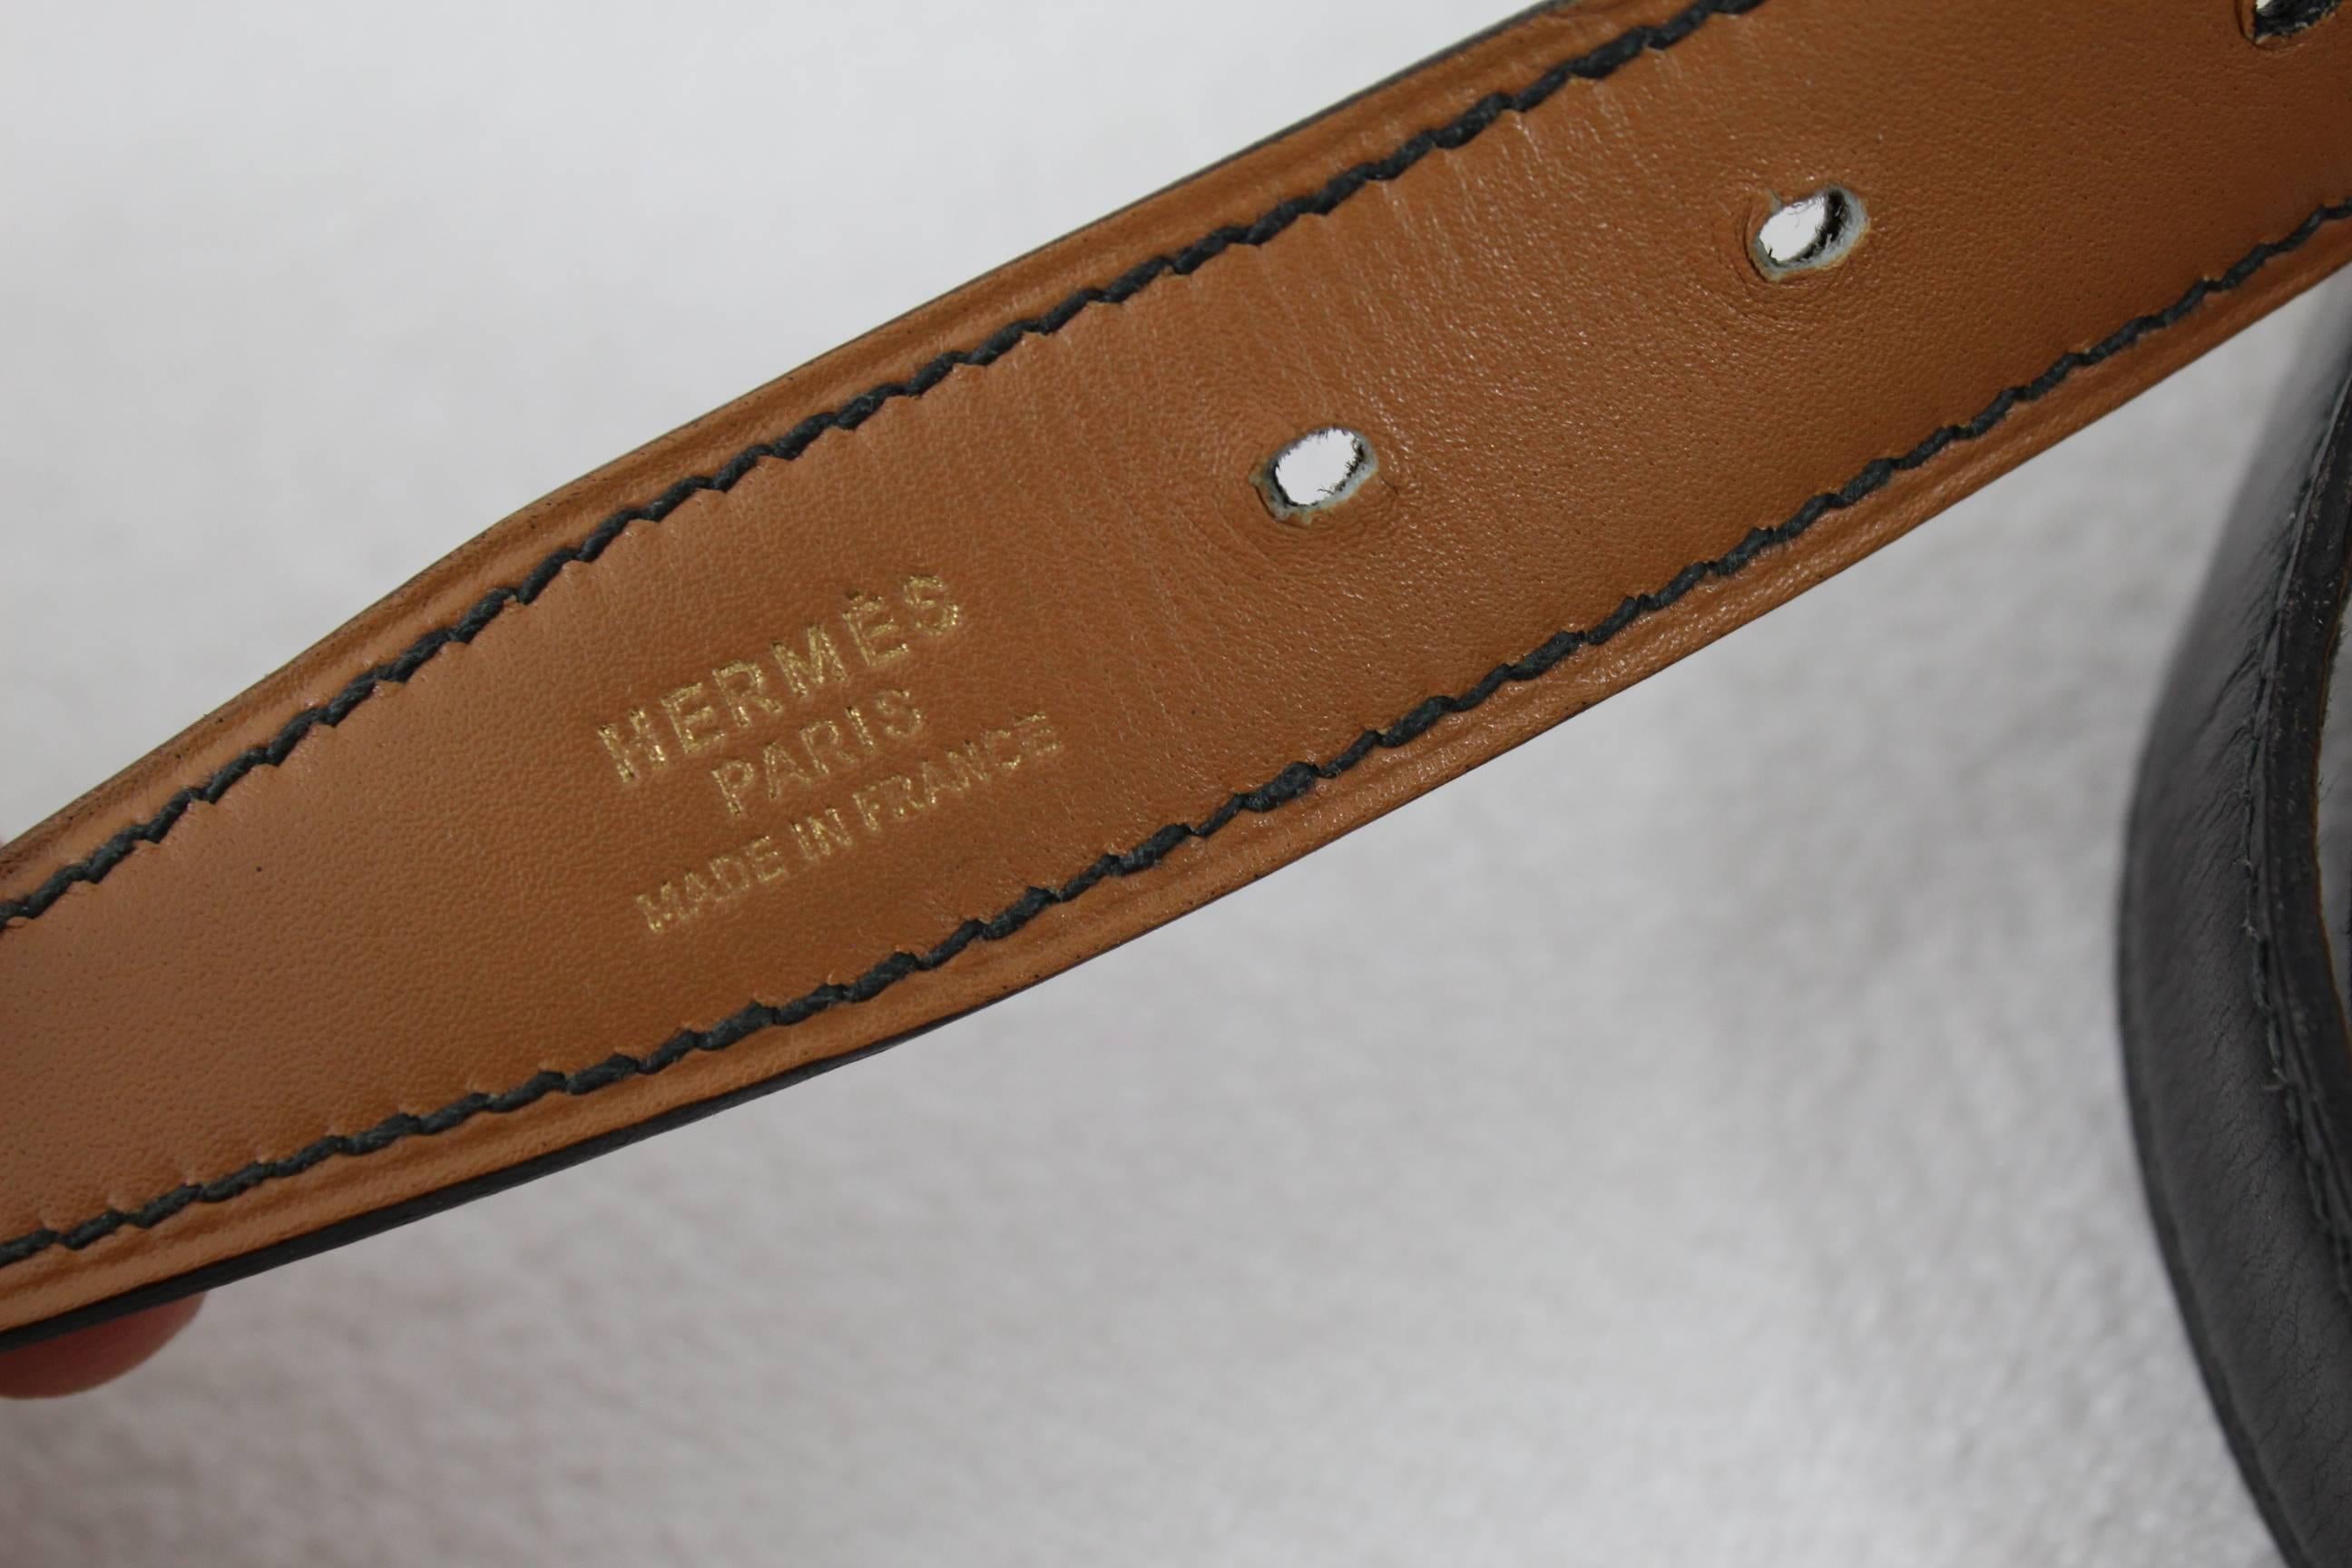 Really nice Hermes Belt with gold plated buckle and black leather.

really nice conddition

Maximum size 38 inches

Sold with box